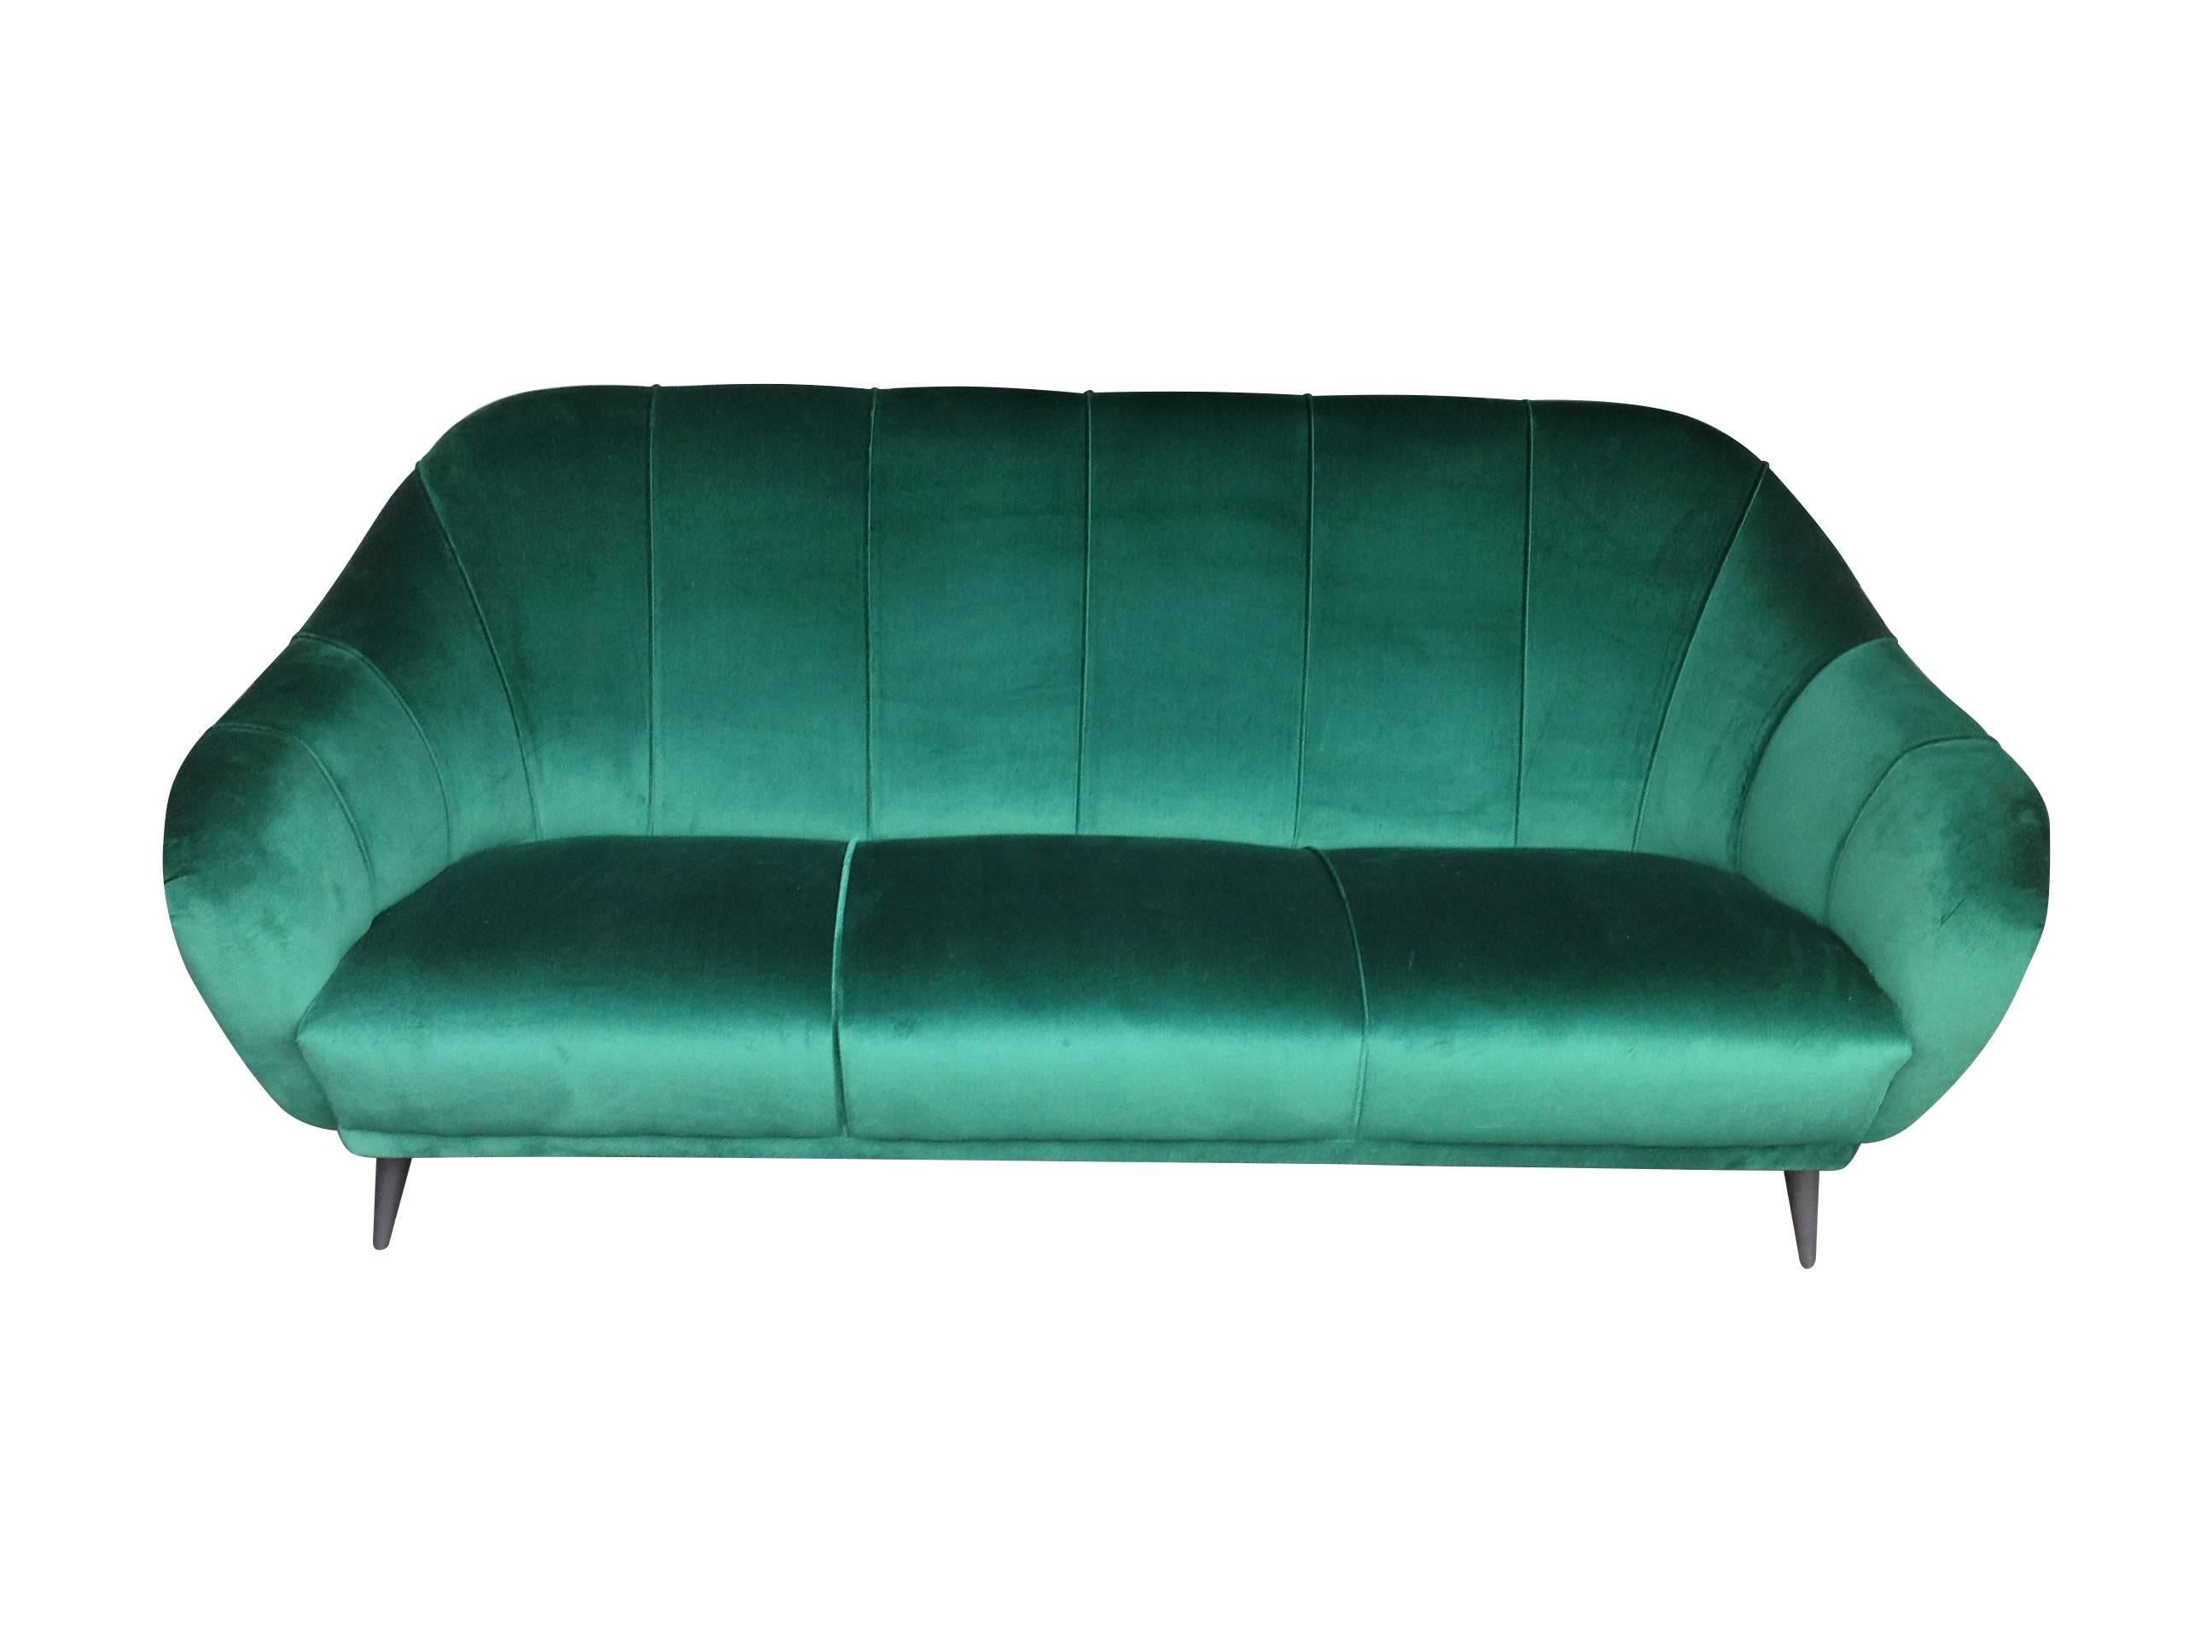 An Italian sofa in the style of Gio Ponti, newly re-upholstered in pleated emerald green velvet, black pointed ebonized feet. Also see listing for matching chair available too.